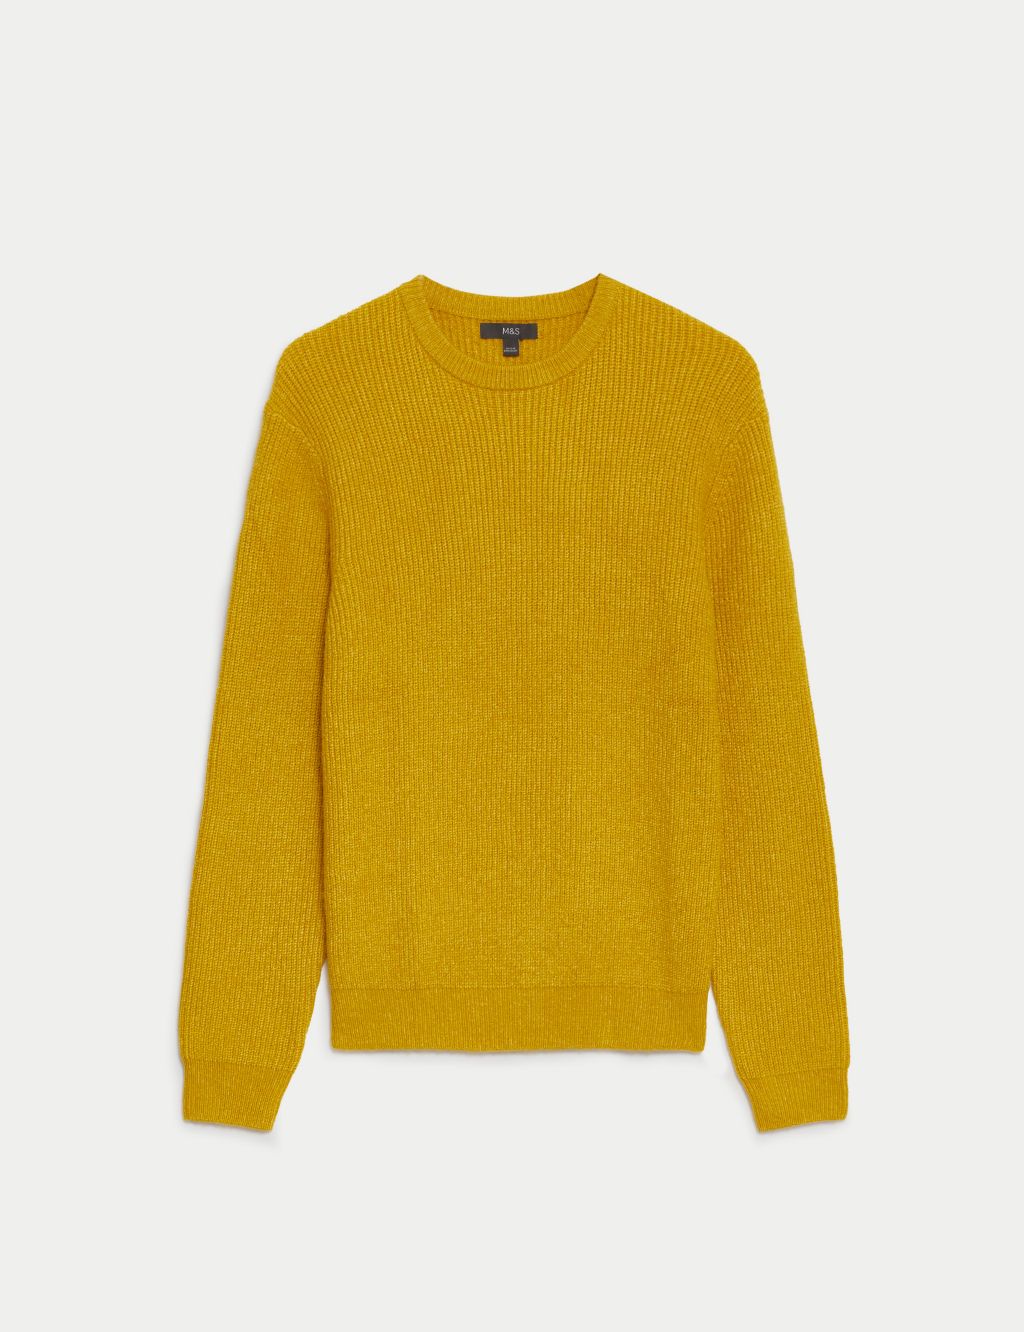 Supersoft Chunky Crew Neck Jumper image 2